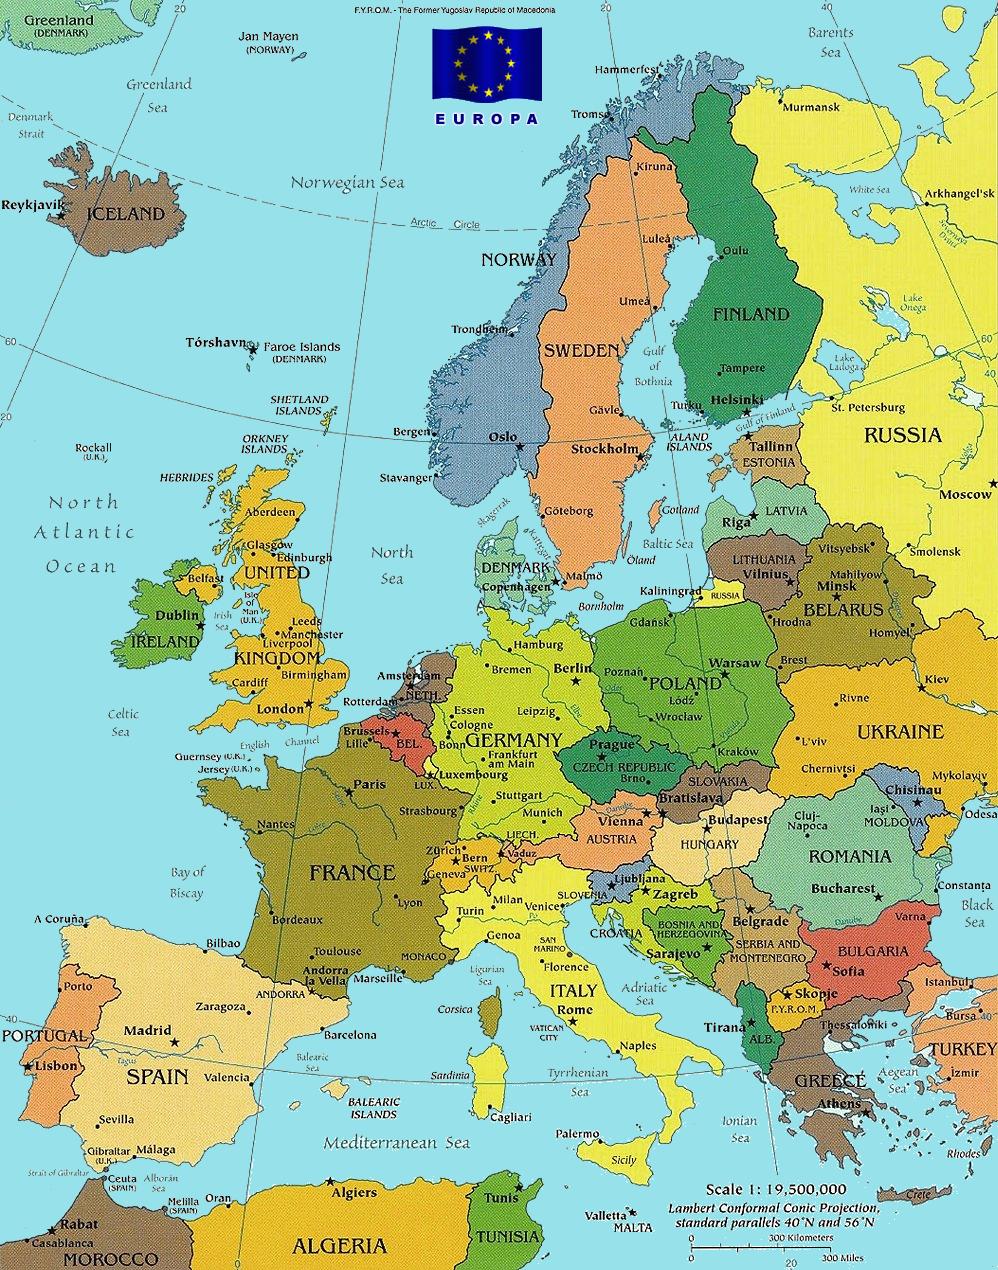 europe travel mapp: Map of Europe Countries